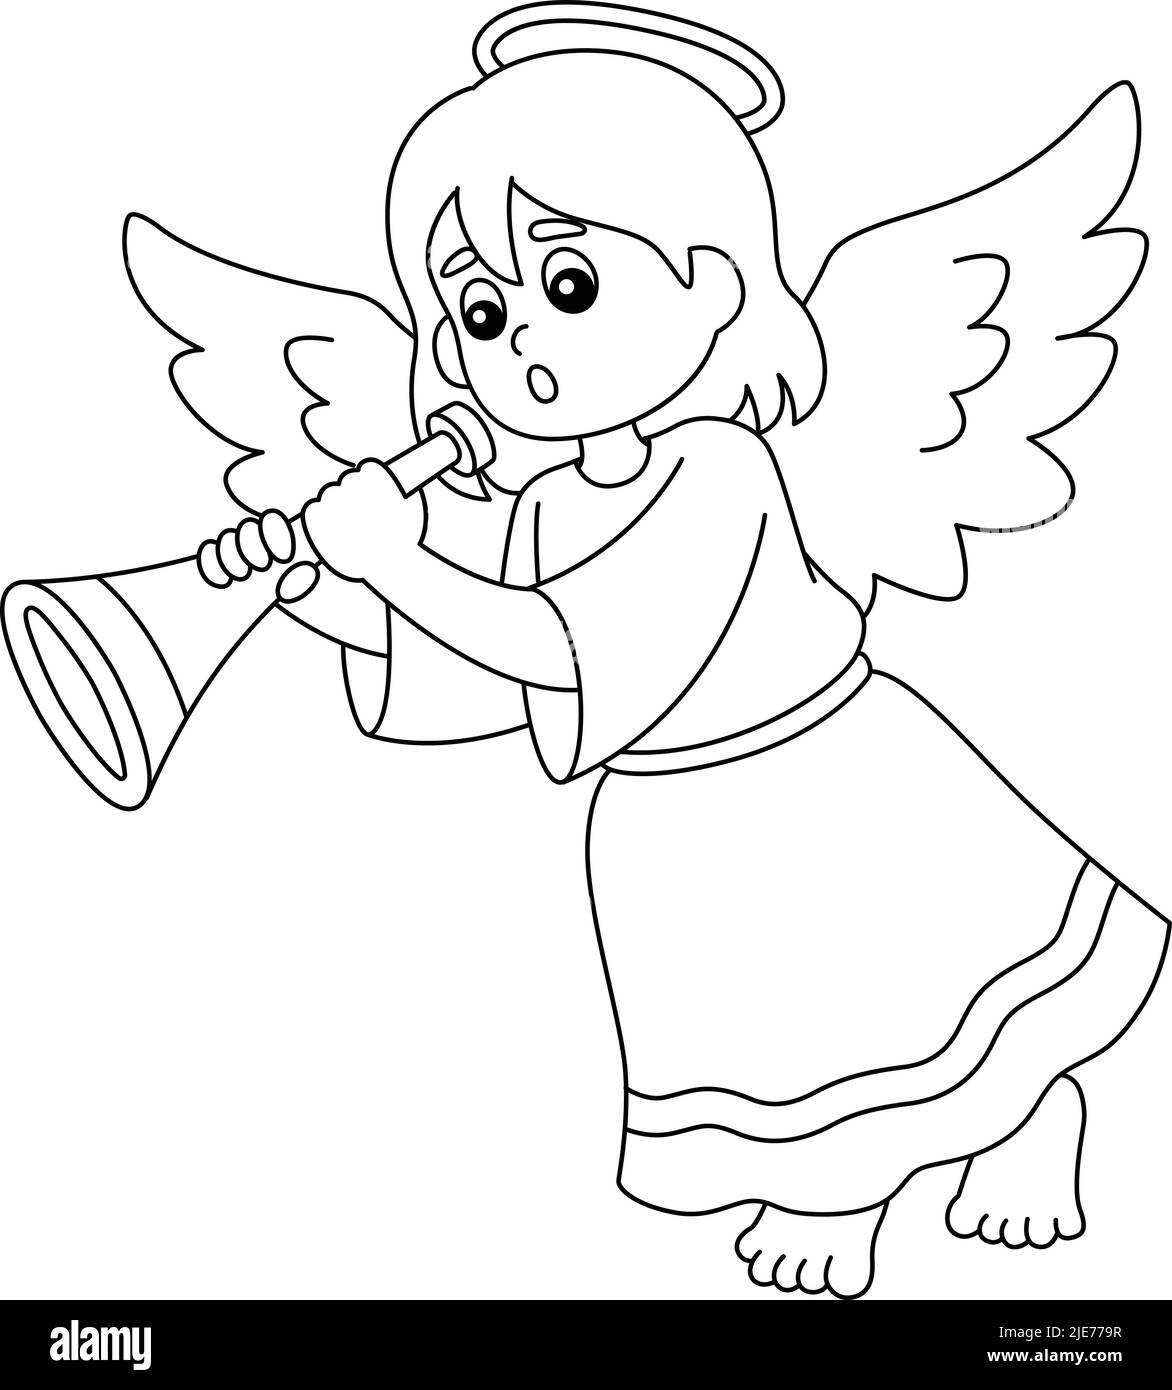 Christmas Angel Isolated Coloring Page for Kids Stock Vector